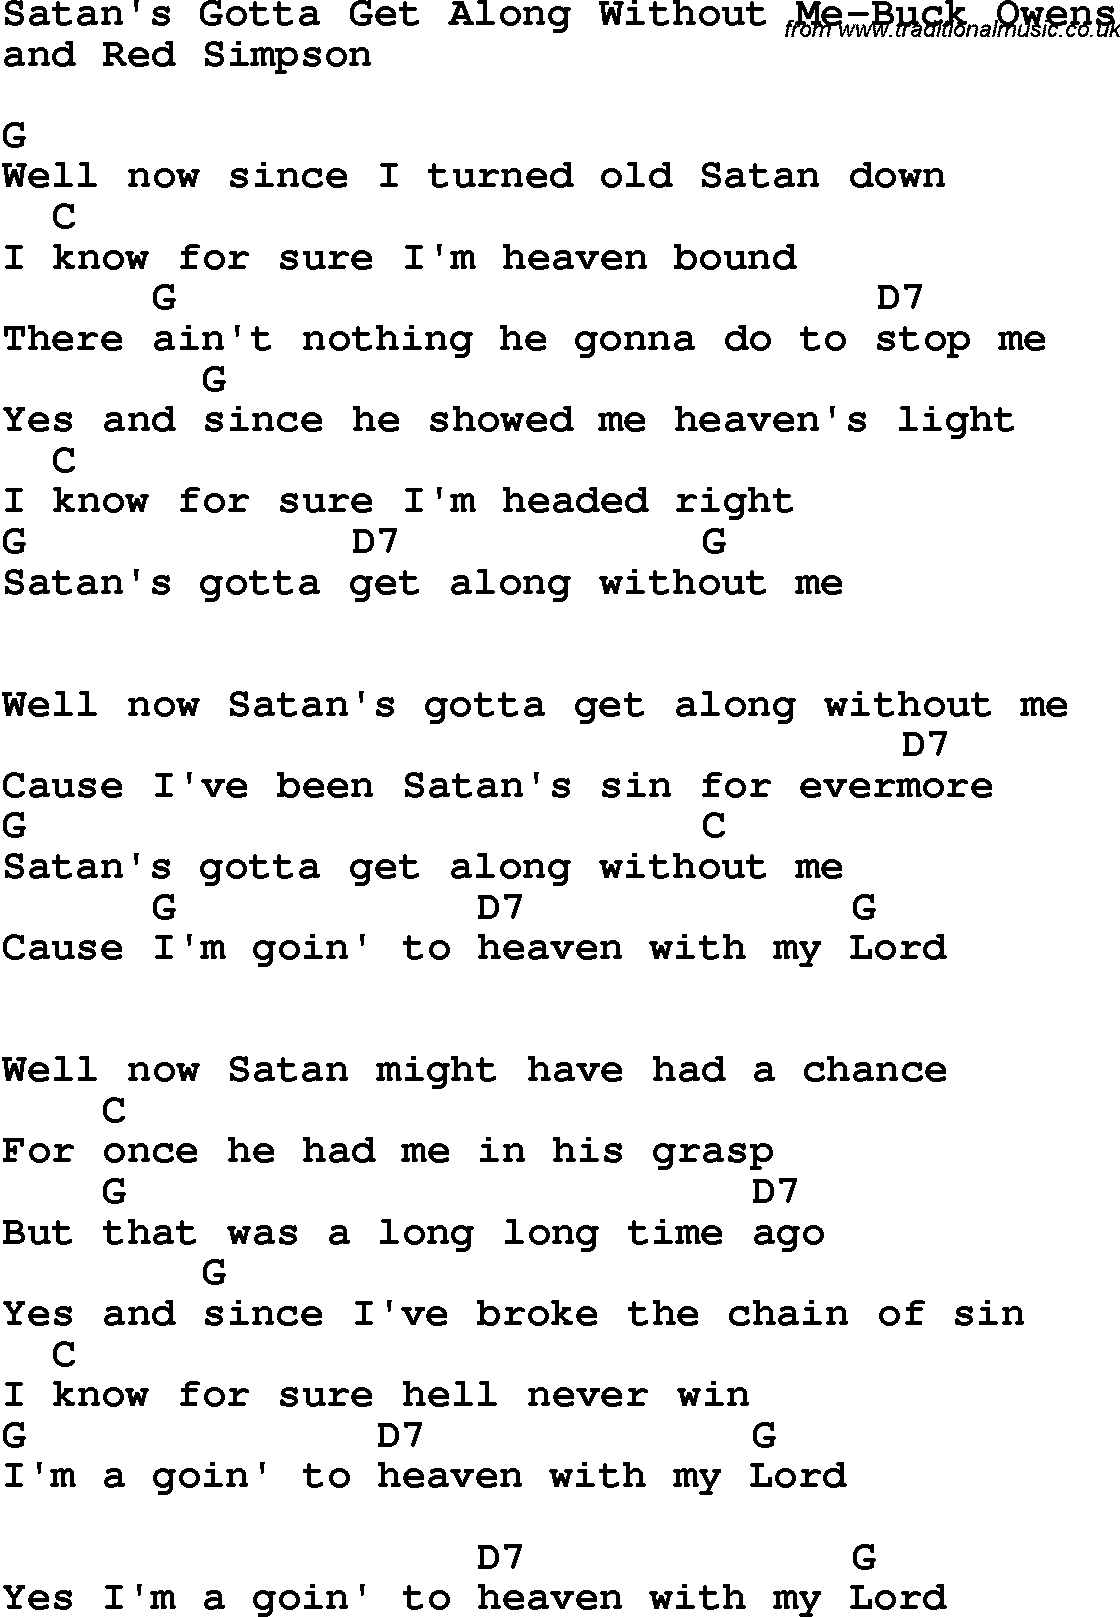 Country, Southern and Bluegrass Gospel Song Satan's Gotta Get Along Without Me-Buck Owens lyrics and chords